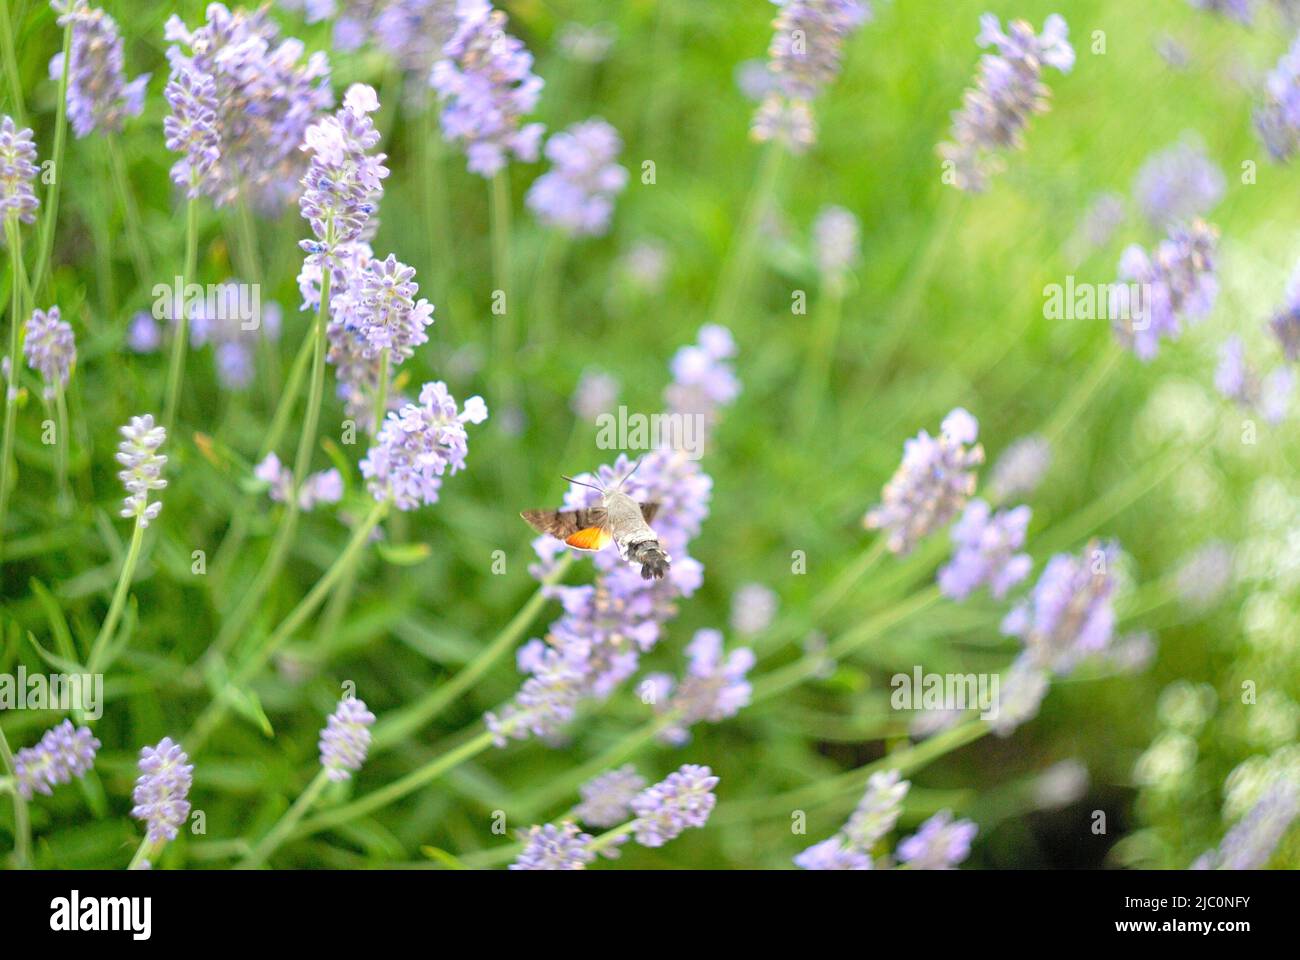 Pictures of bees, and other insects in lavender flowers Stock Photo